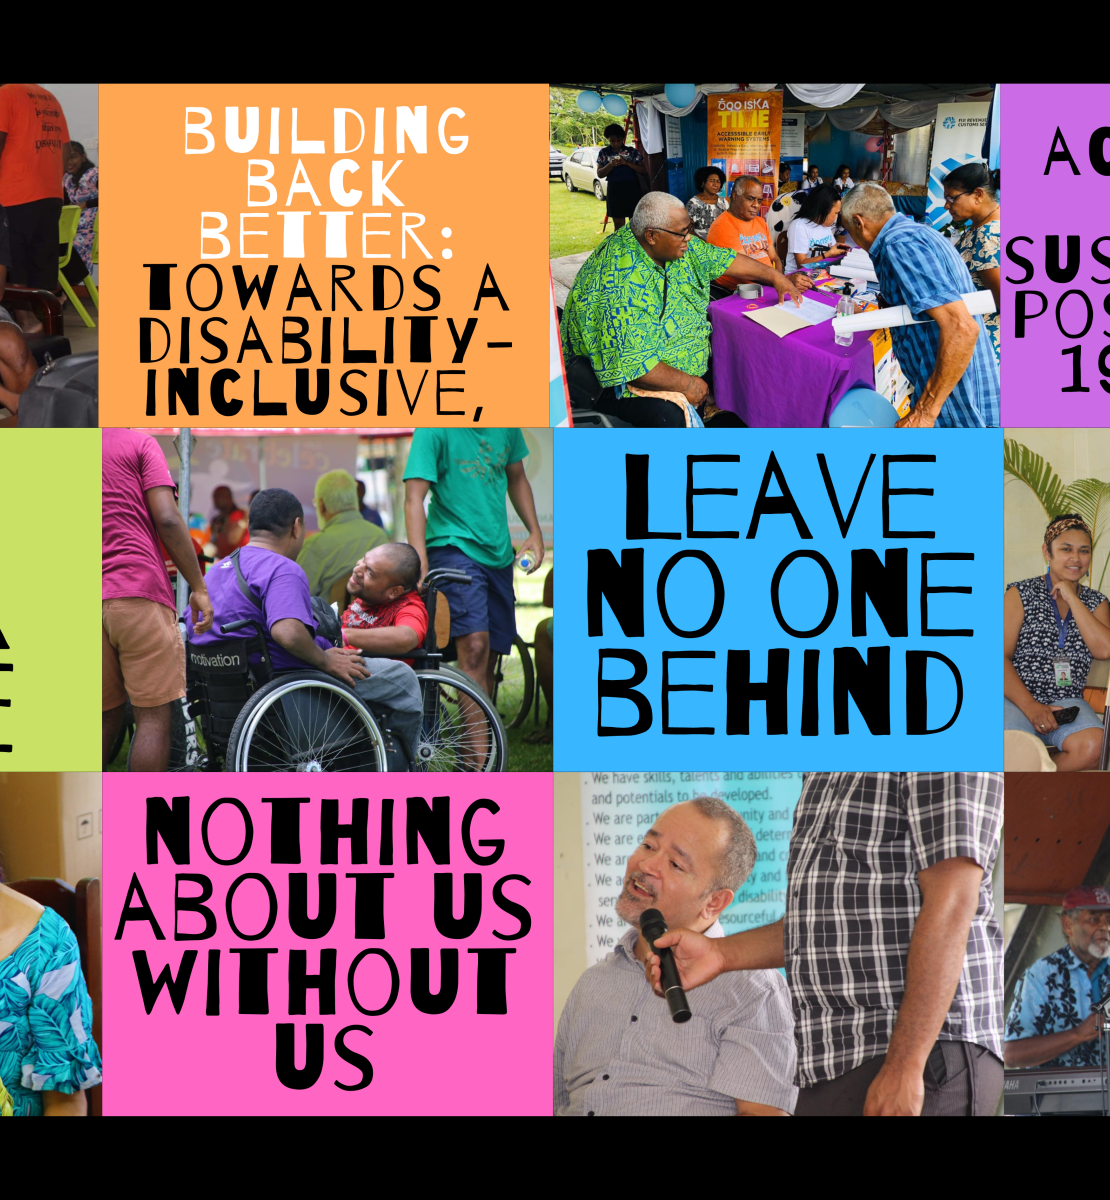 A compilation of words and images showing different ways the UN is helping achieve the SDG's by helping people with disabilities.